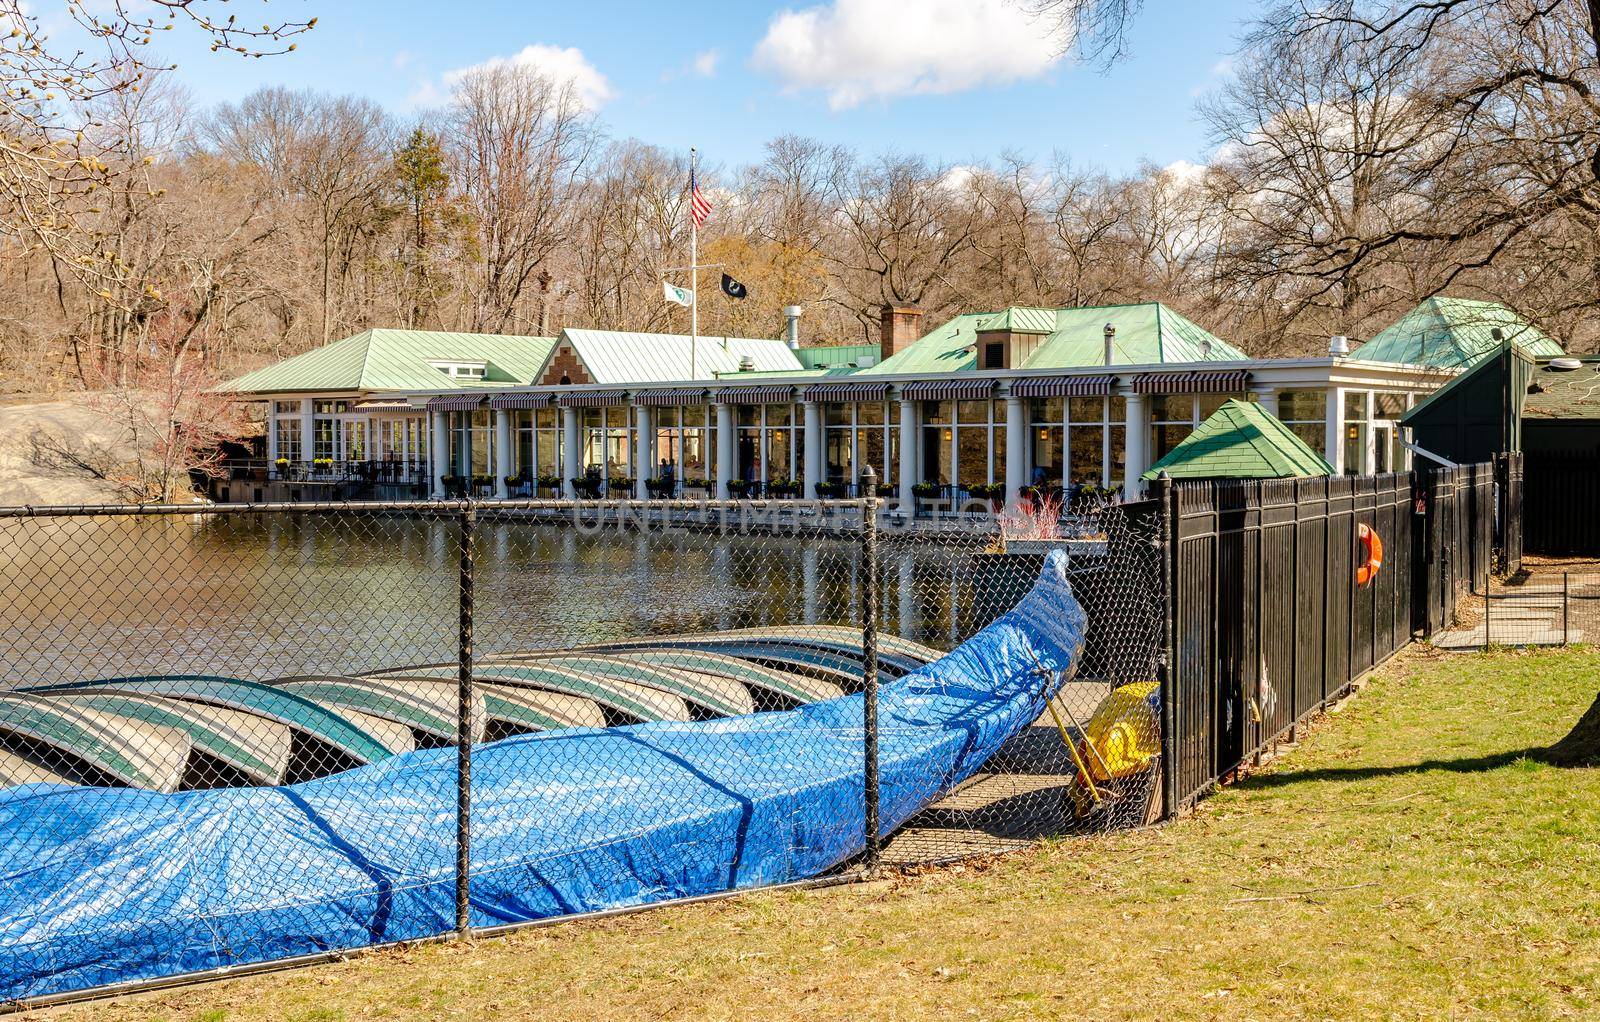 Central Park Boathouse Restaurant, New York City during daylight in winter with fence, boats and lake in the forefront, horizontal